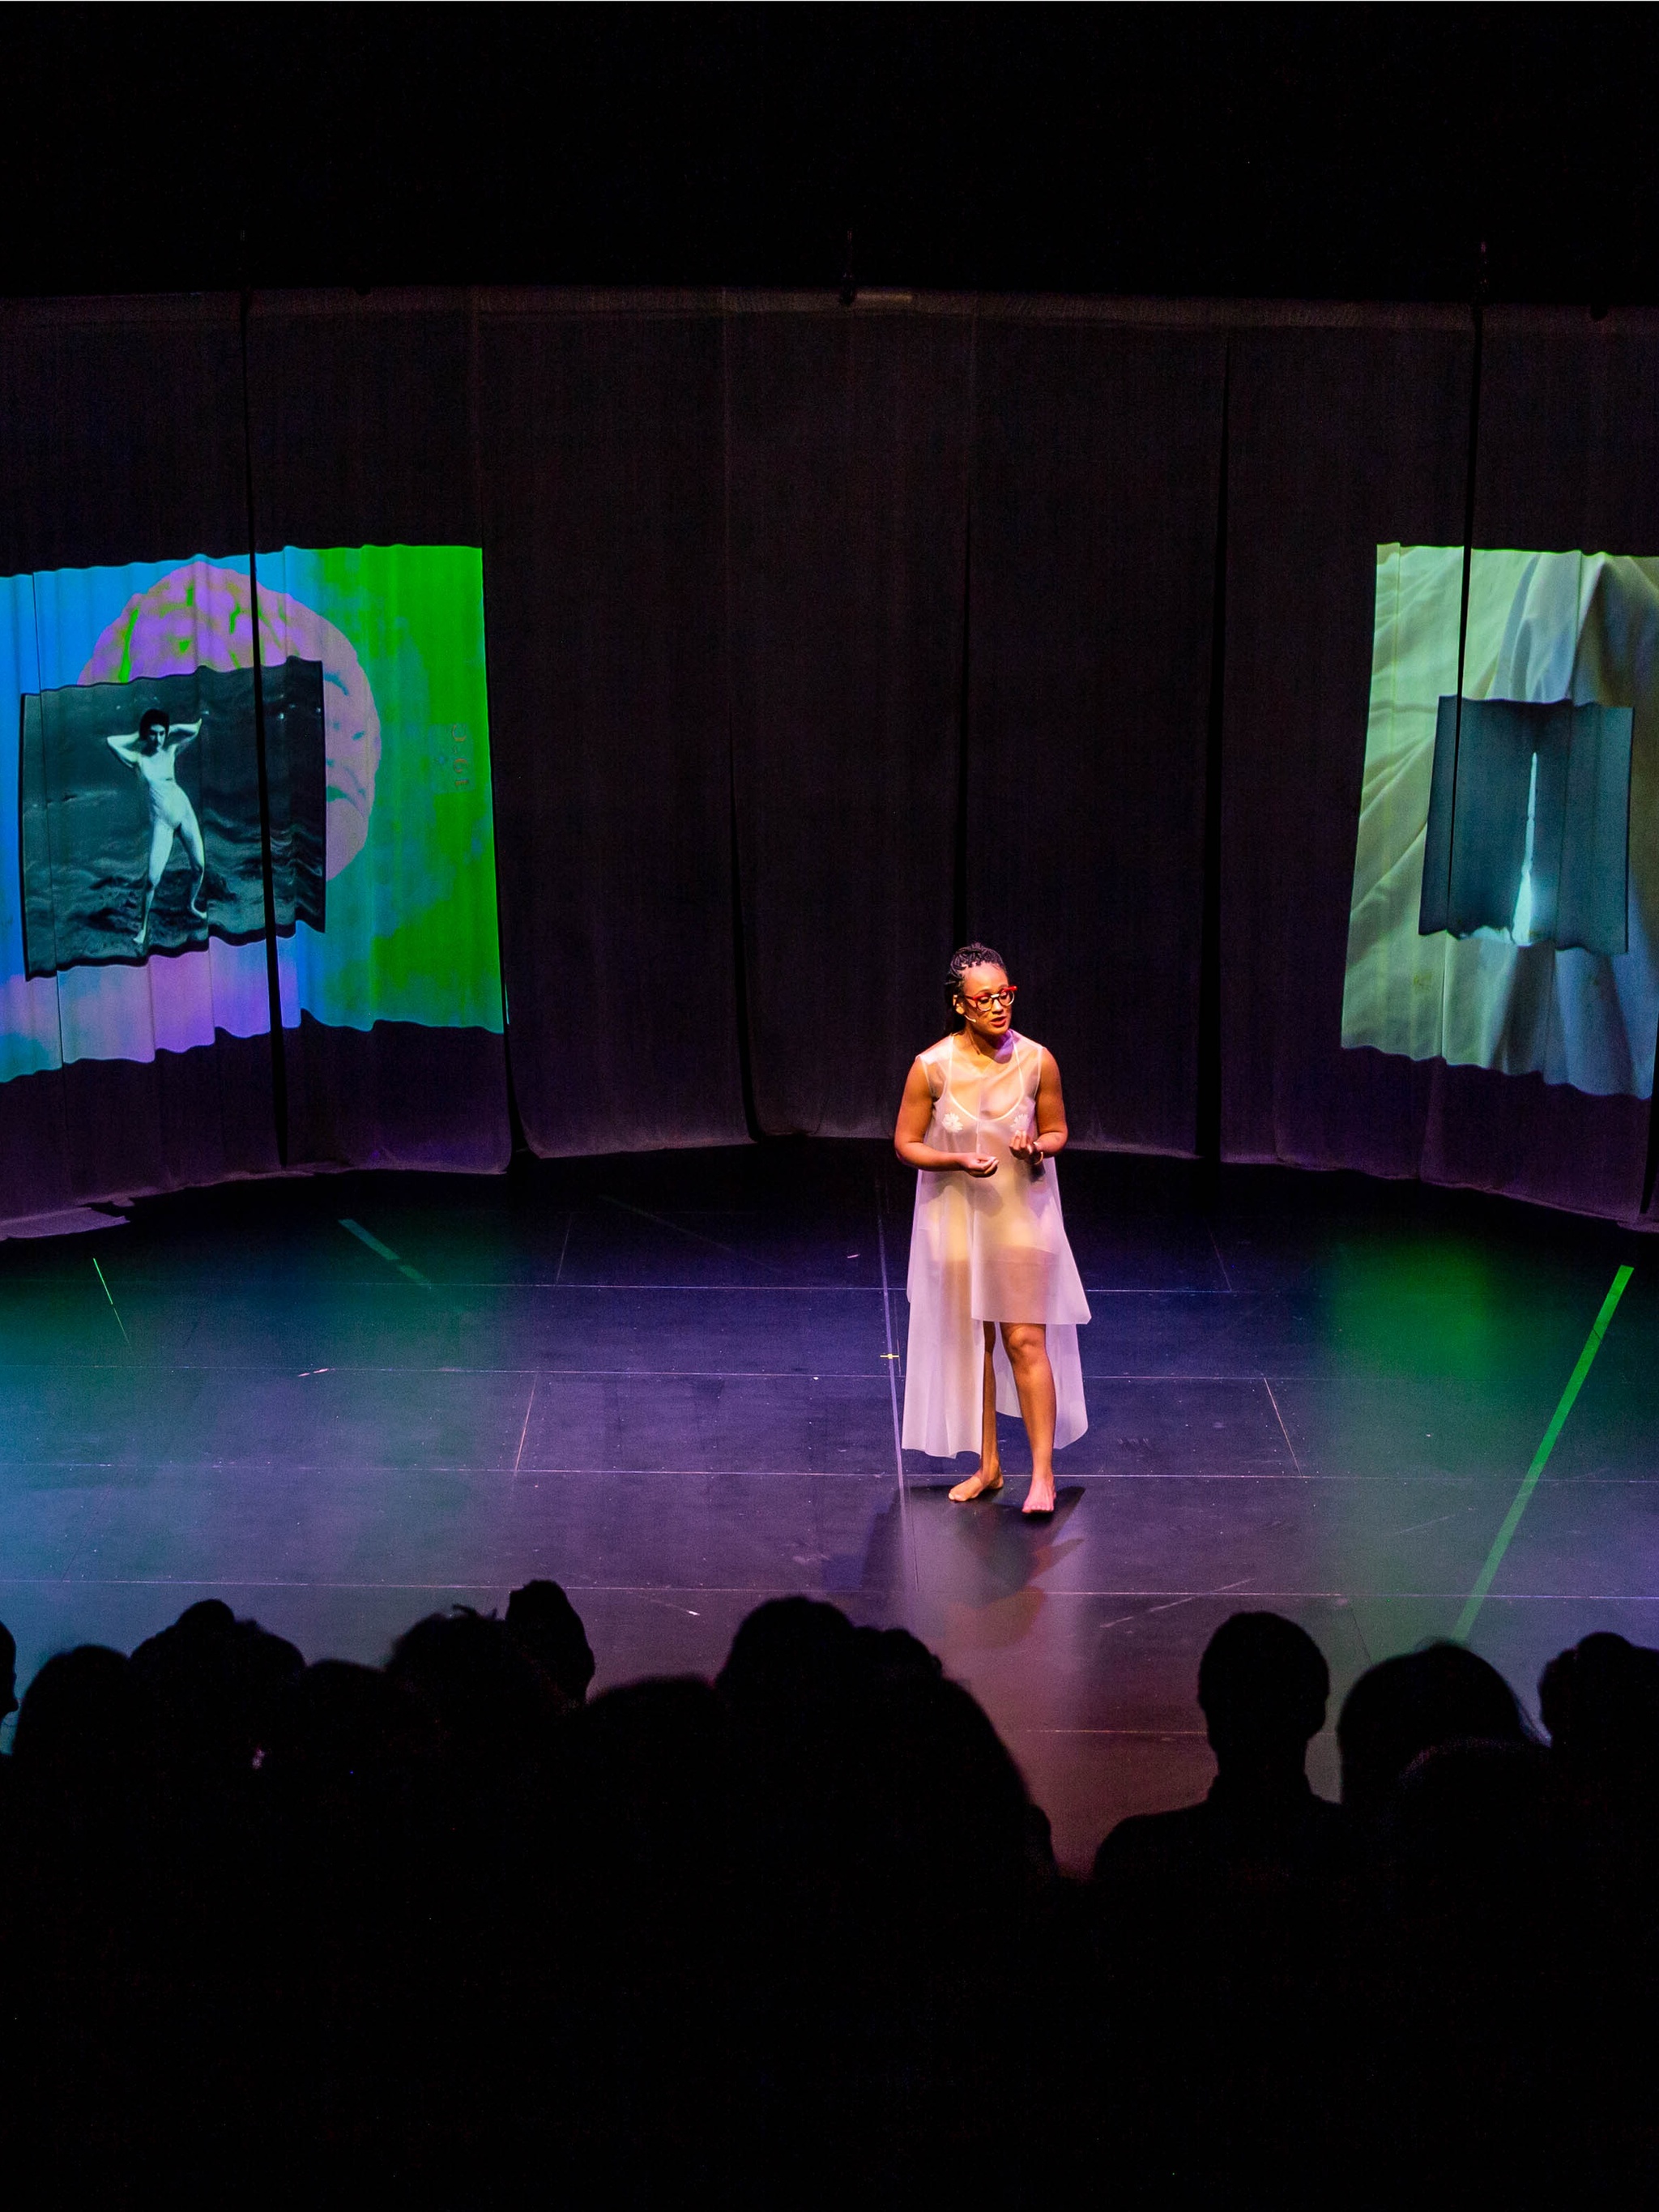 The artist Eleanor Kipping performs on stage in a darkened theater in front of an audience. She wears a sheer pink dress and red framed glasses. She is speaking to the audience, flanked by two screens with video projections.